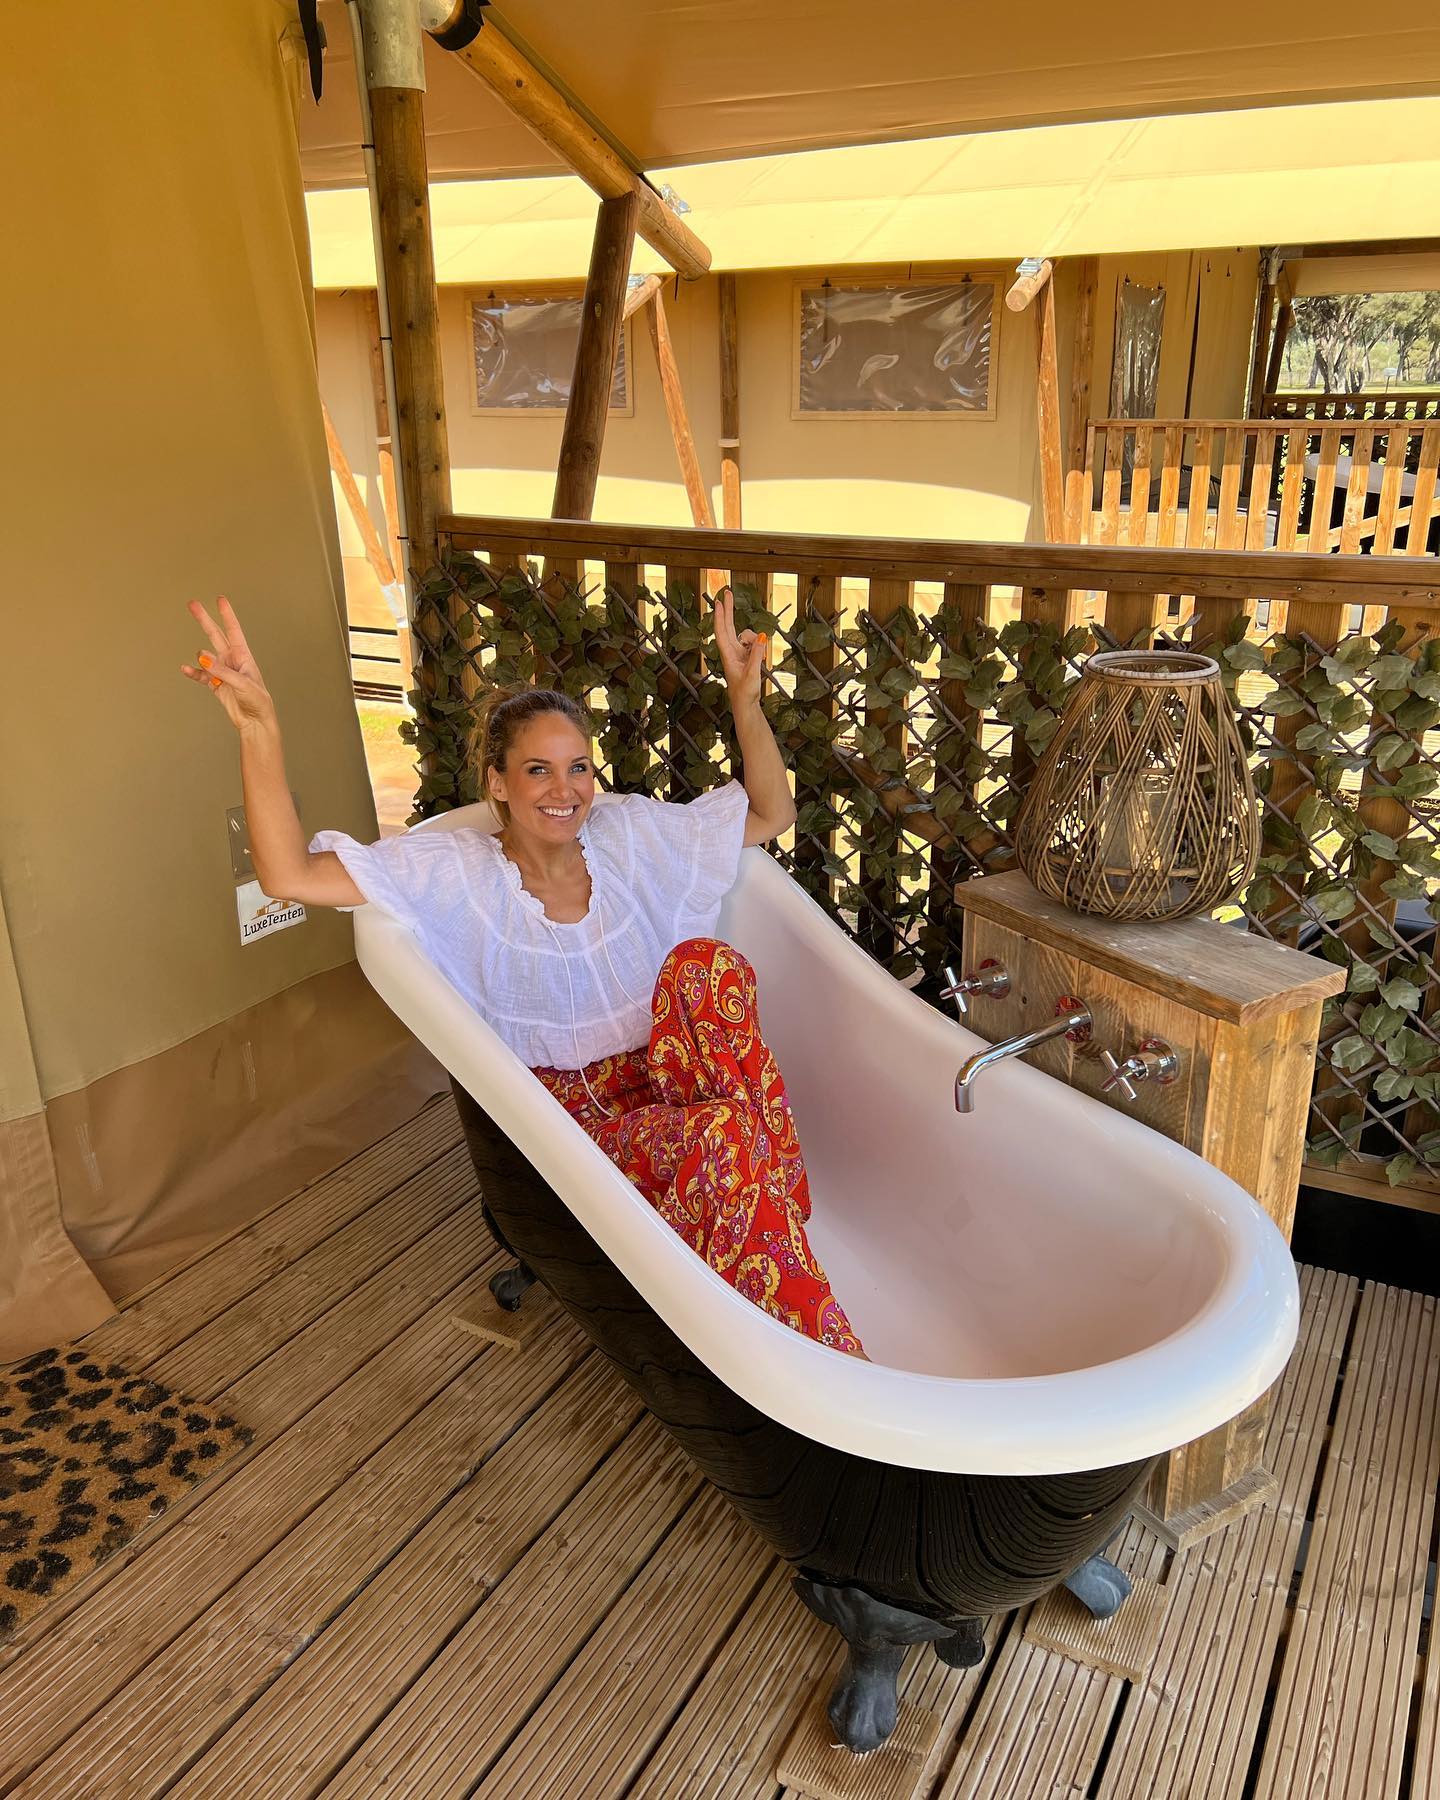 WIN 2 Nights Of Glamping For You And A Friend Thanks To BIG4 Renmark!